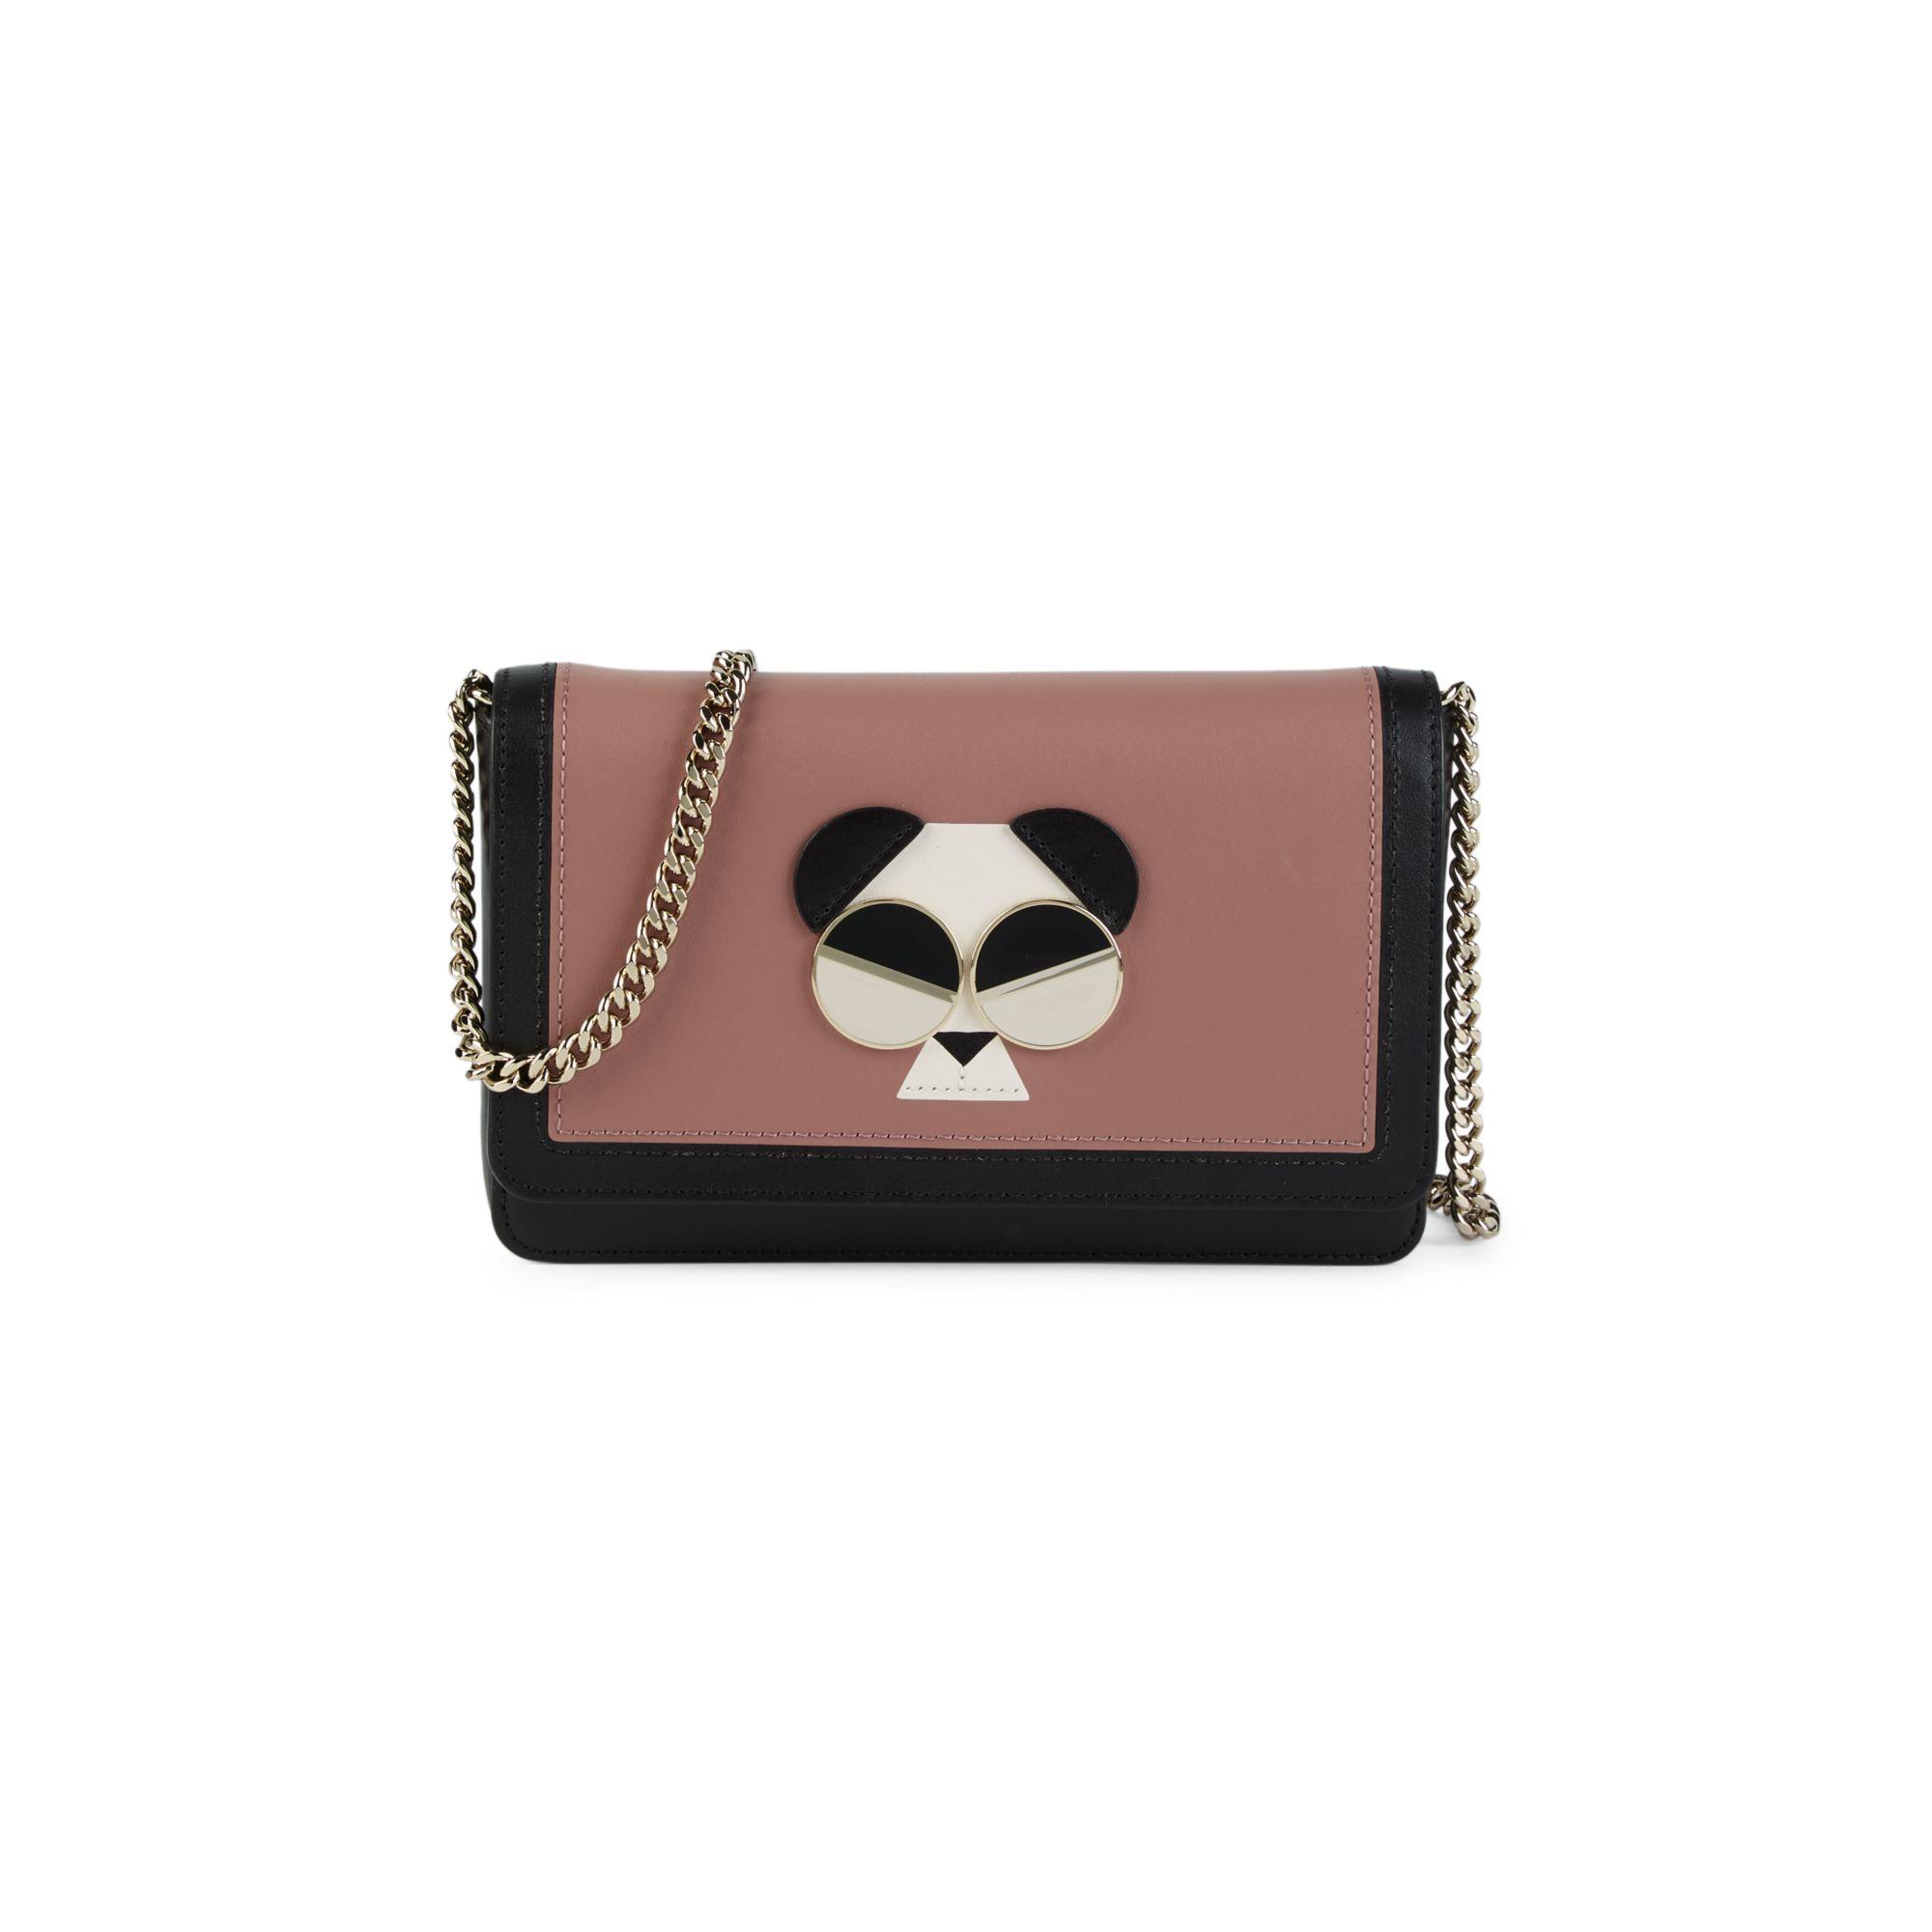 Sold at Auction: Loewe - New - Panda Crossbody Bag - Black and White - Small